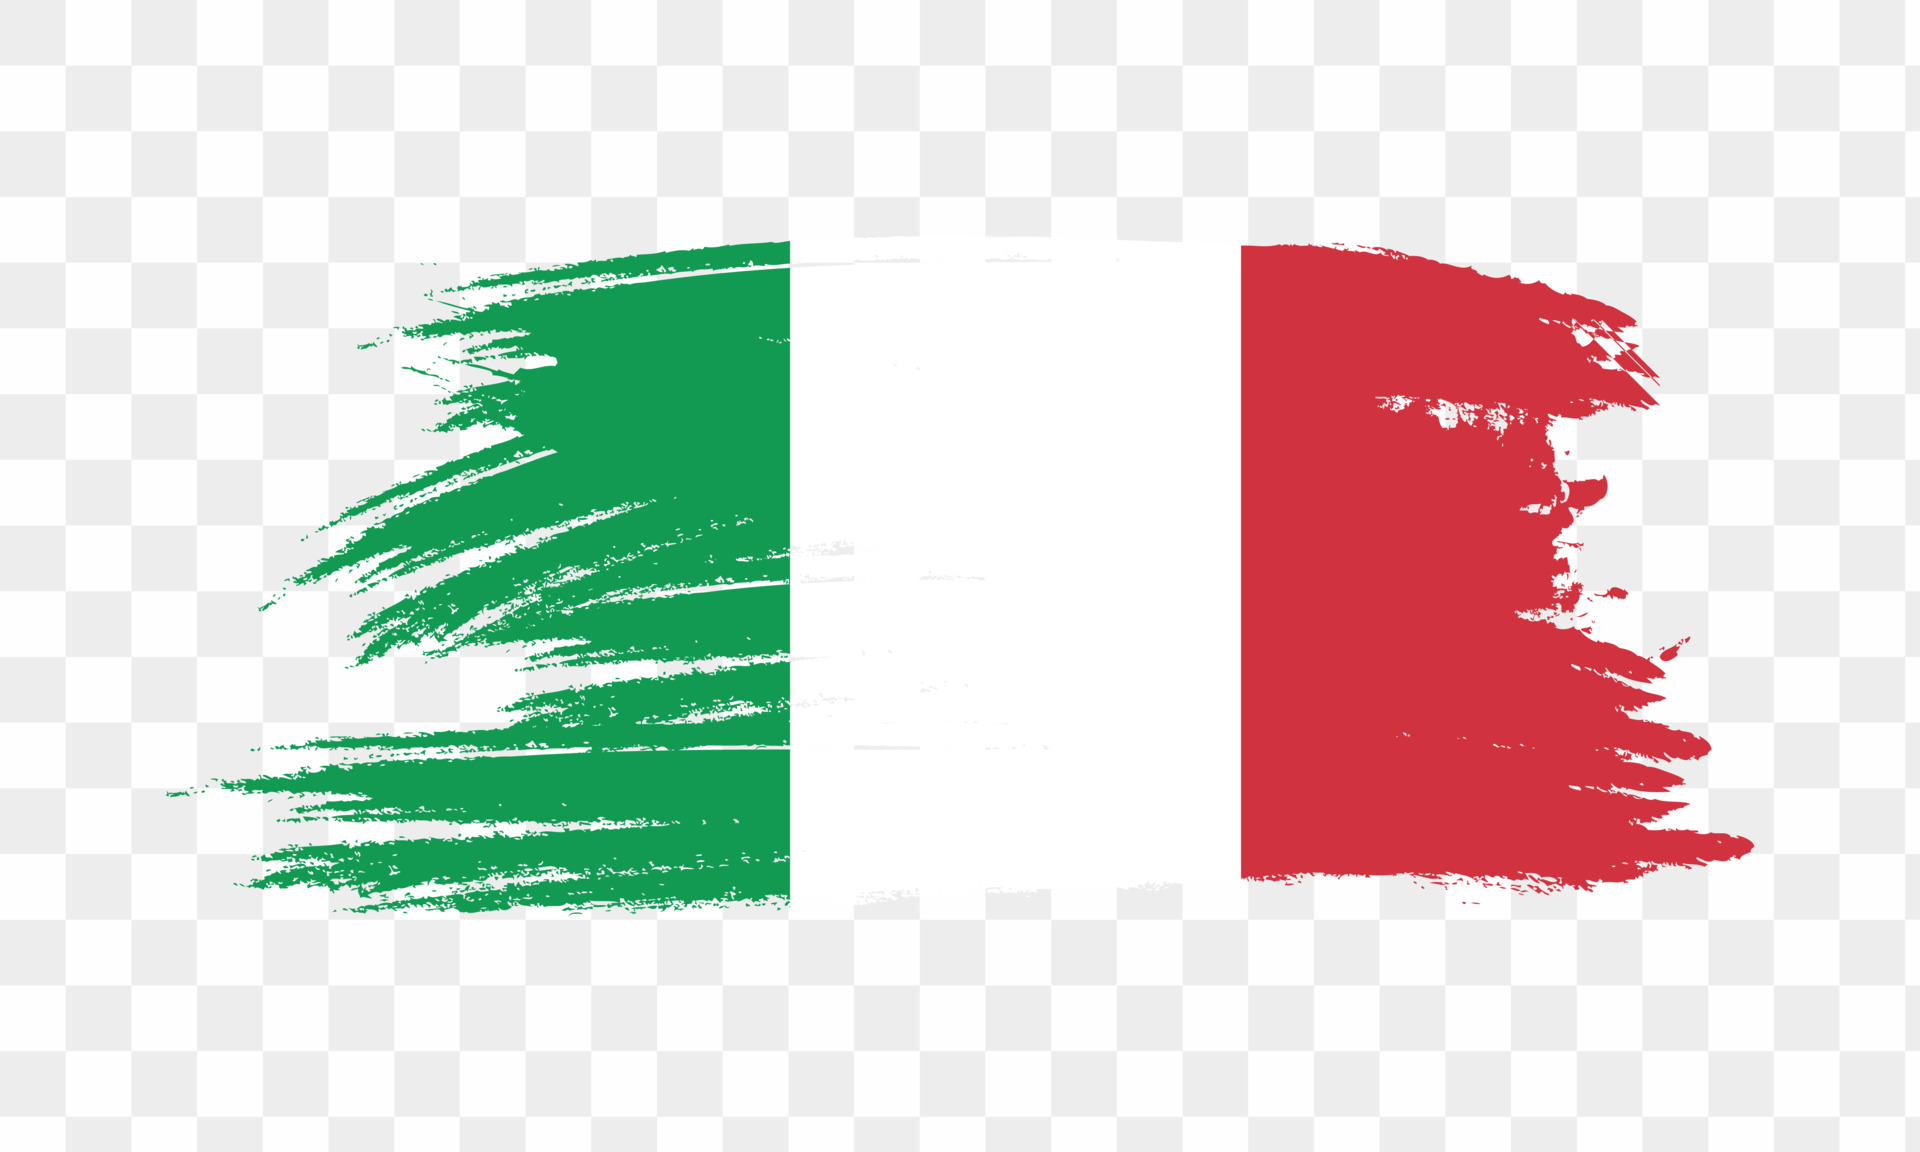 https://static.vecteezy.com/system/resources/previews/004/709/136/original/italy-flag-national-flag-of-italy-italy-flag-in-standard-proportion-color-mode-rgb-illustration-vector.jpg